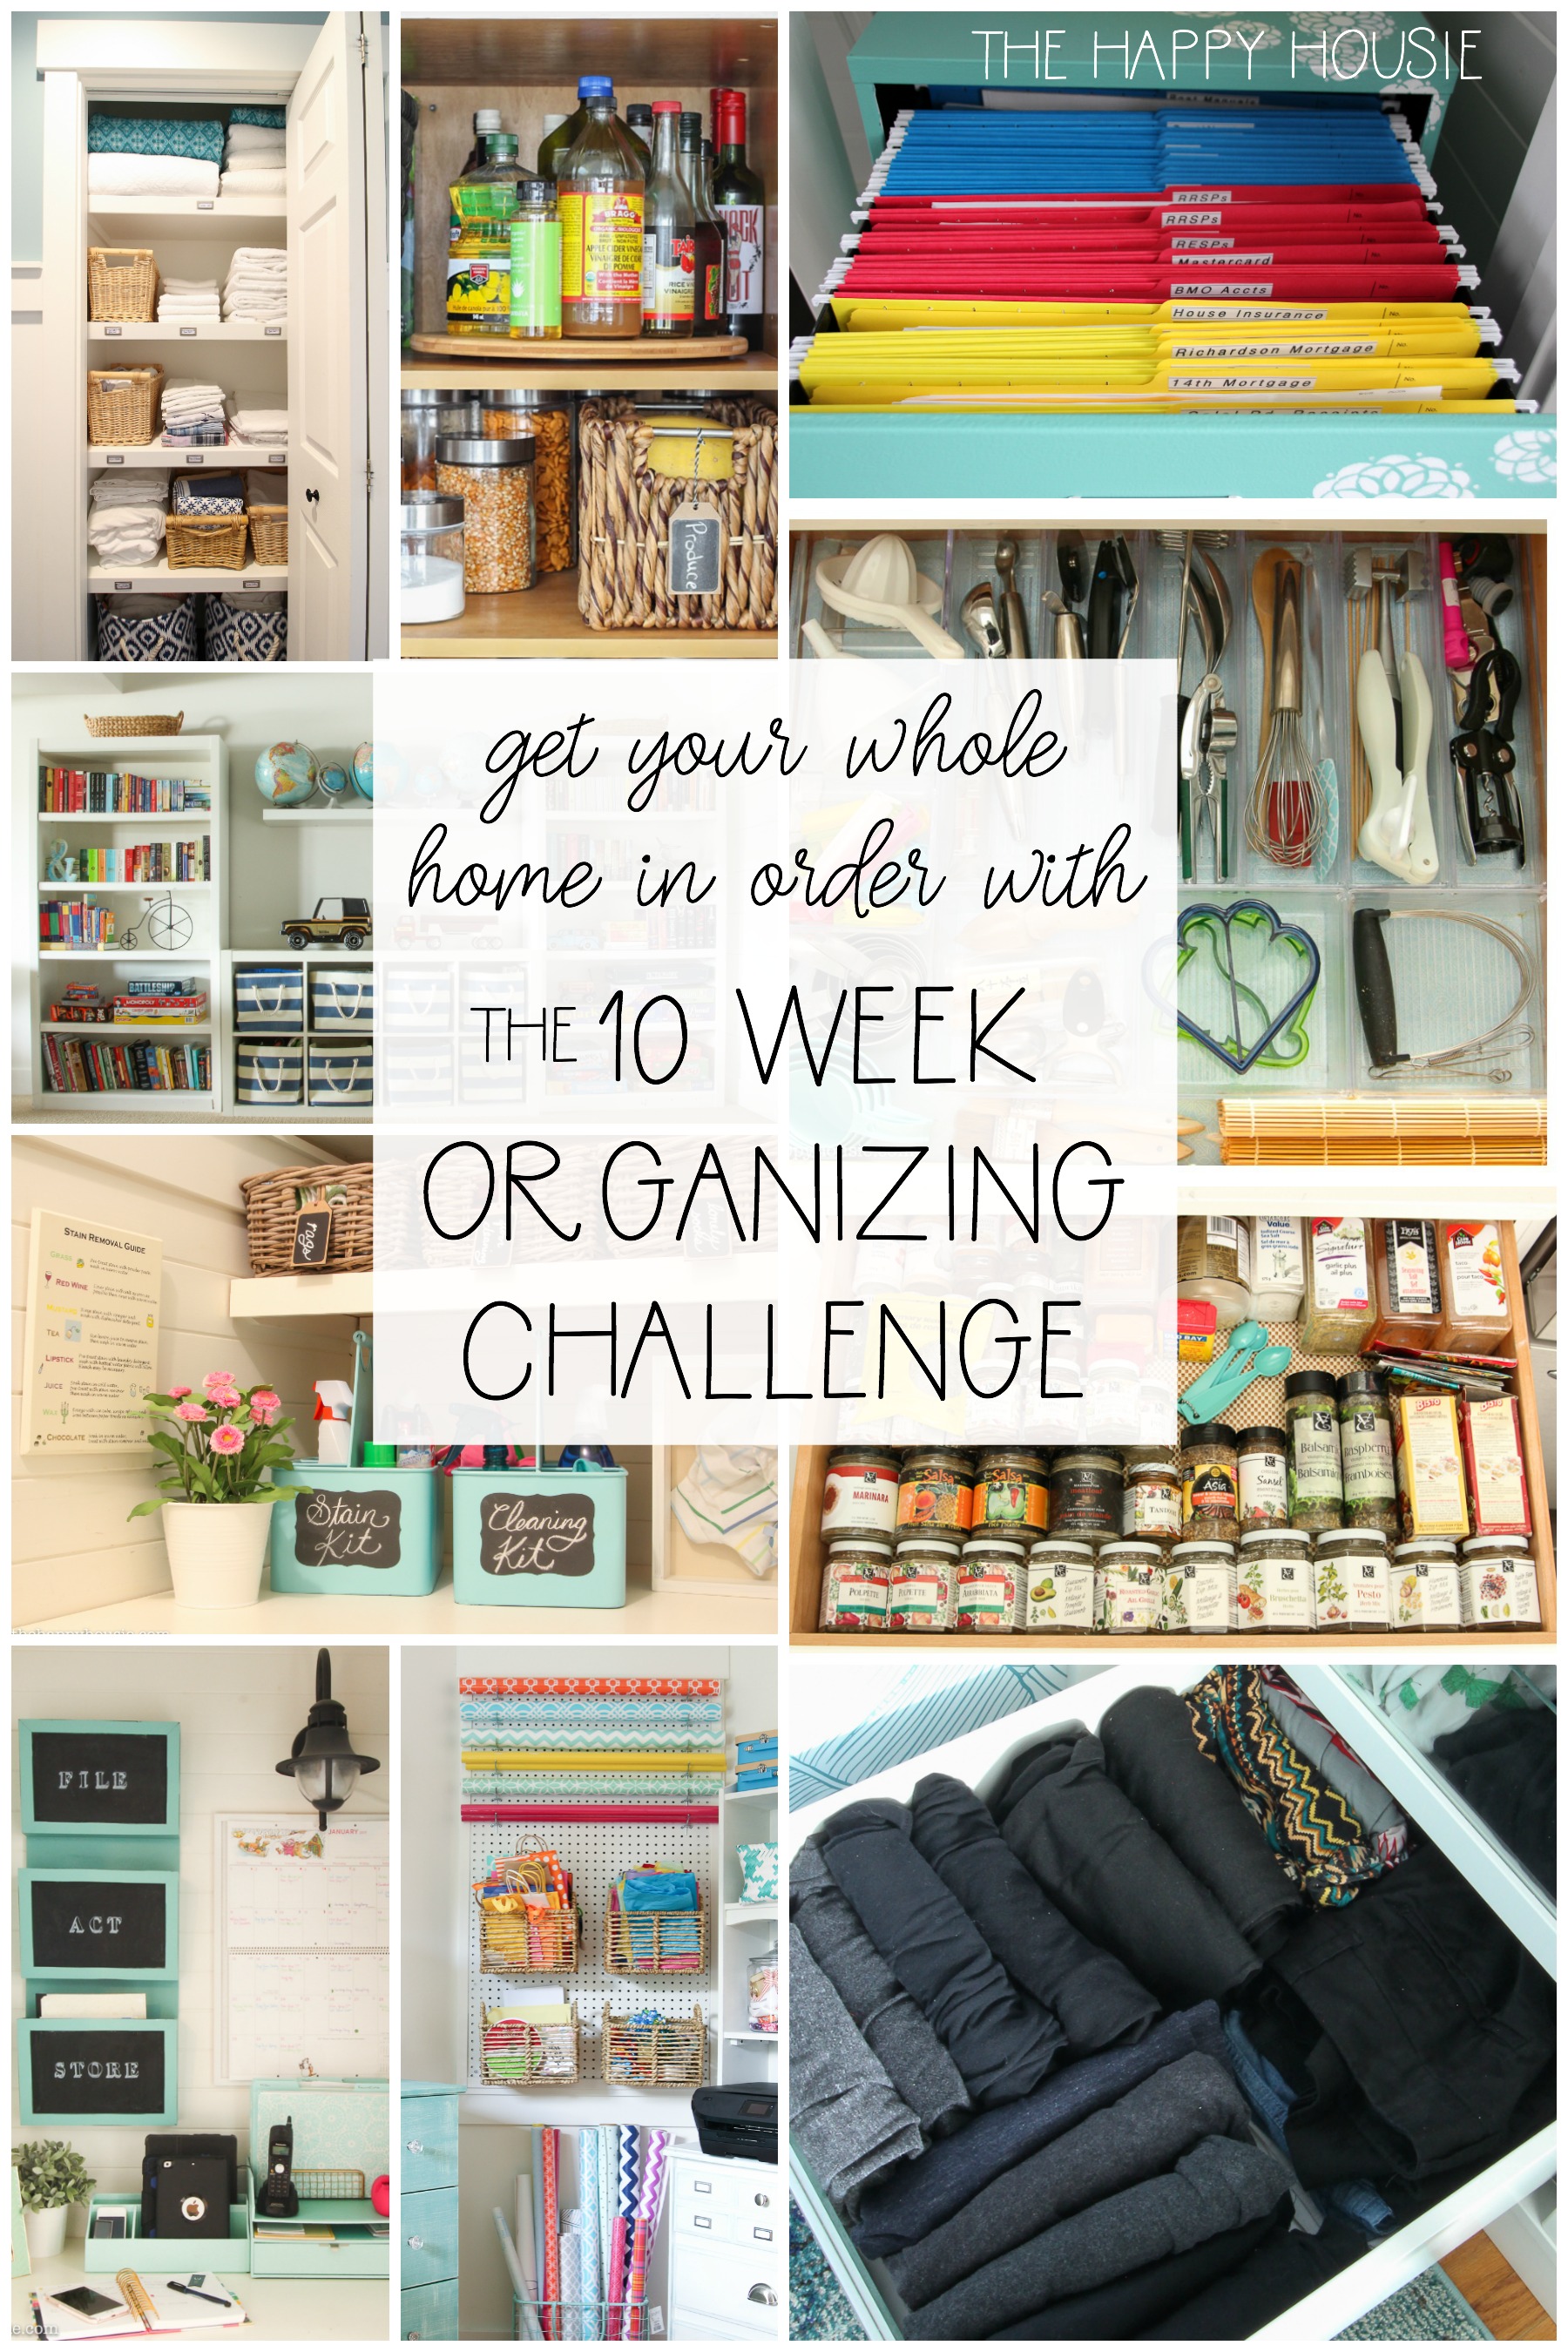 The 10 Week Organizing Challenge graphic.